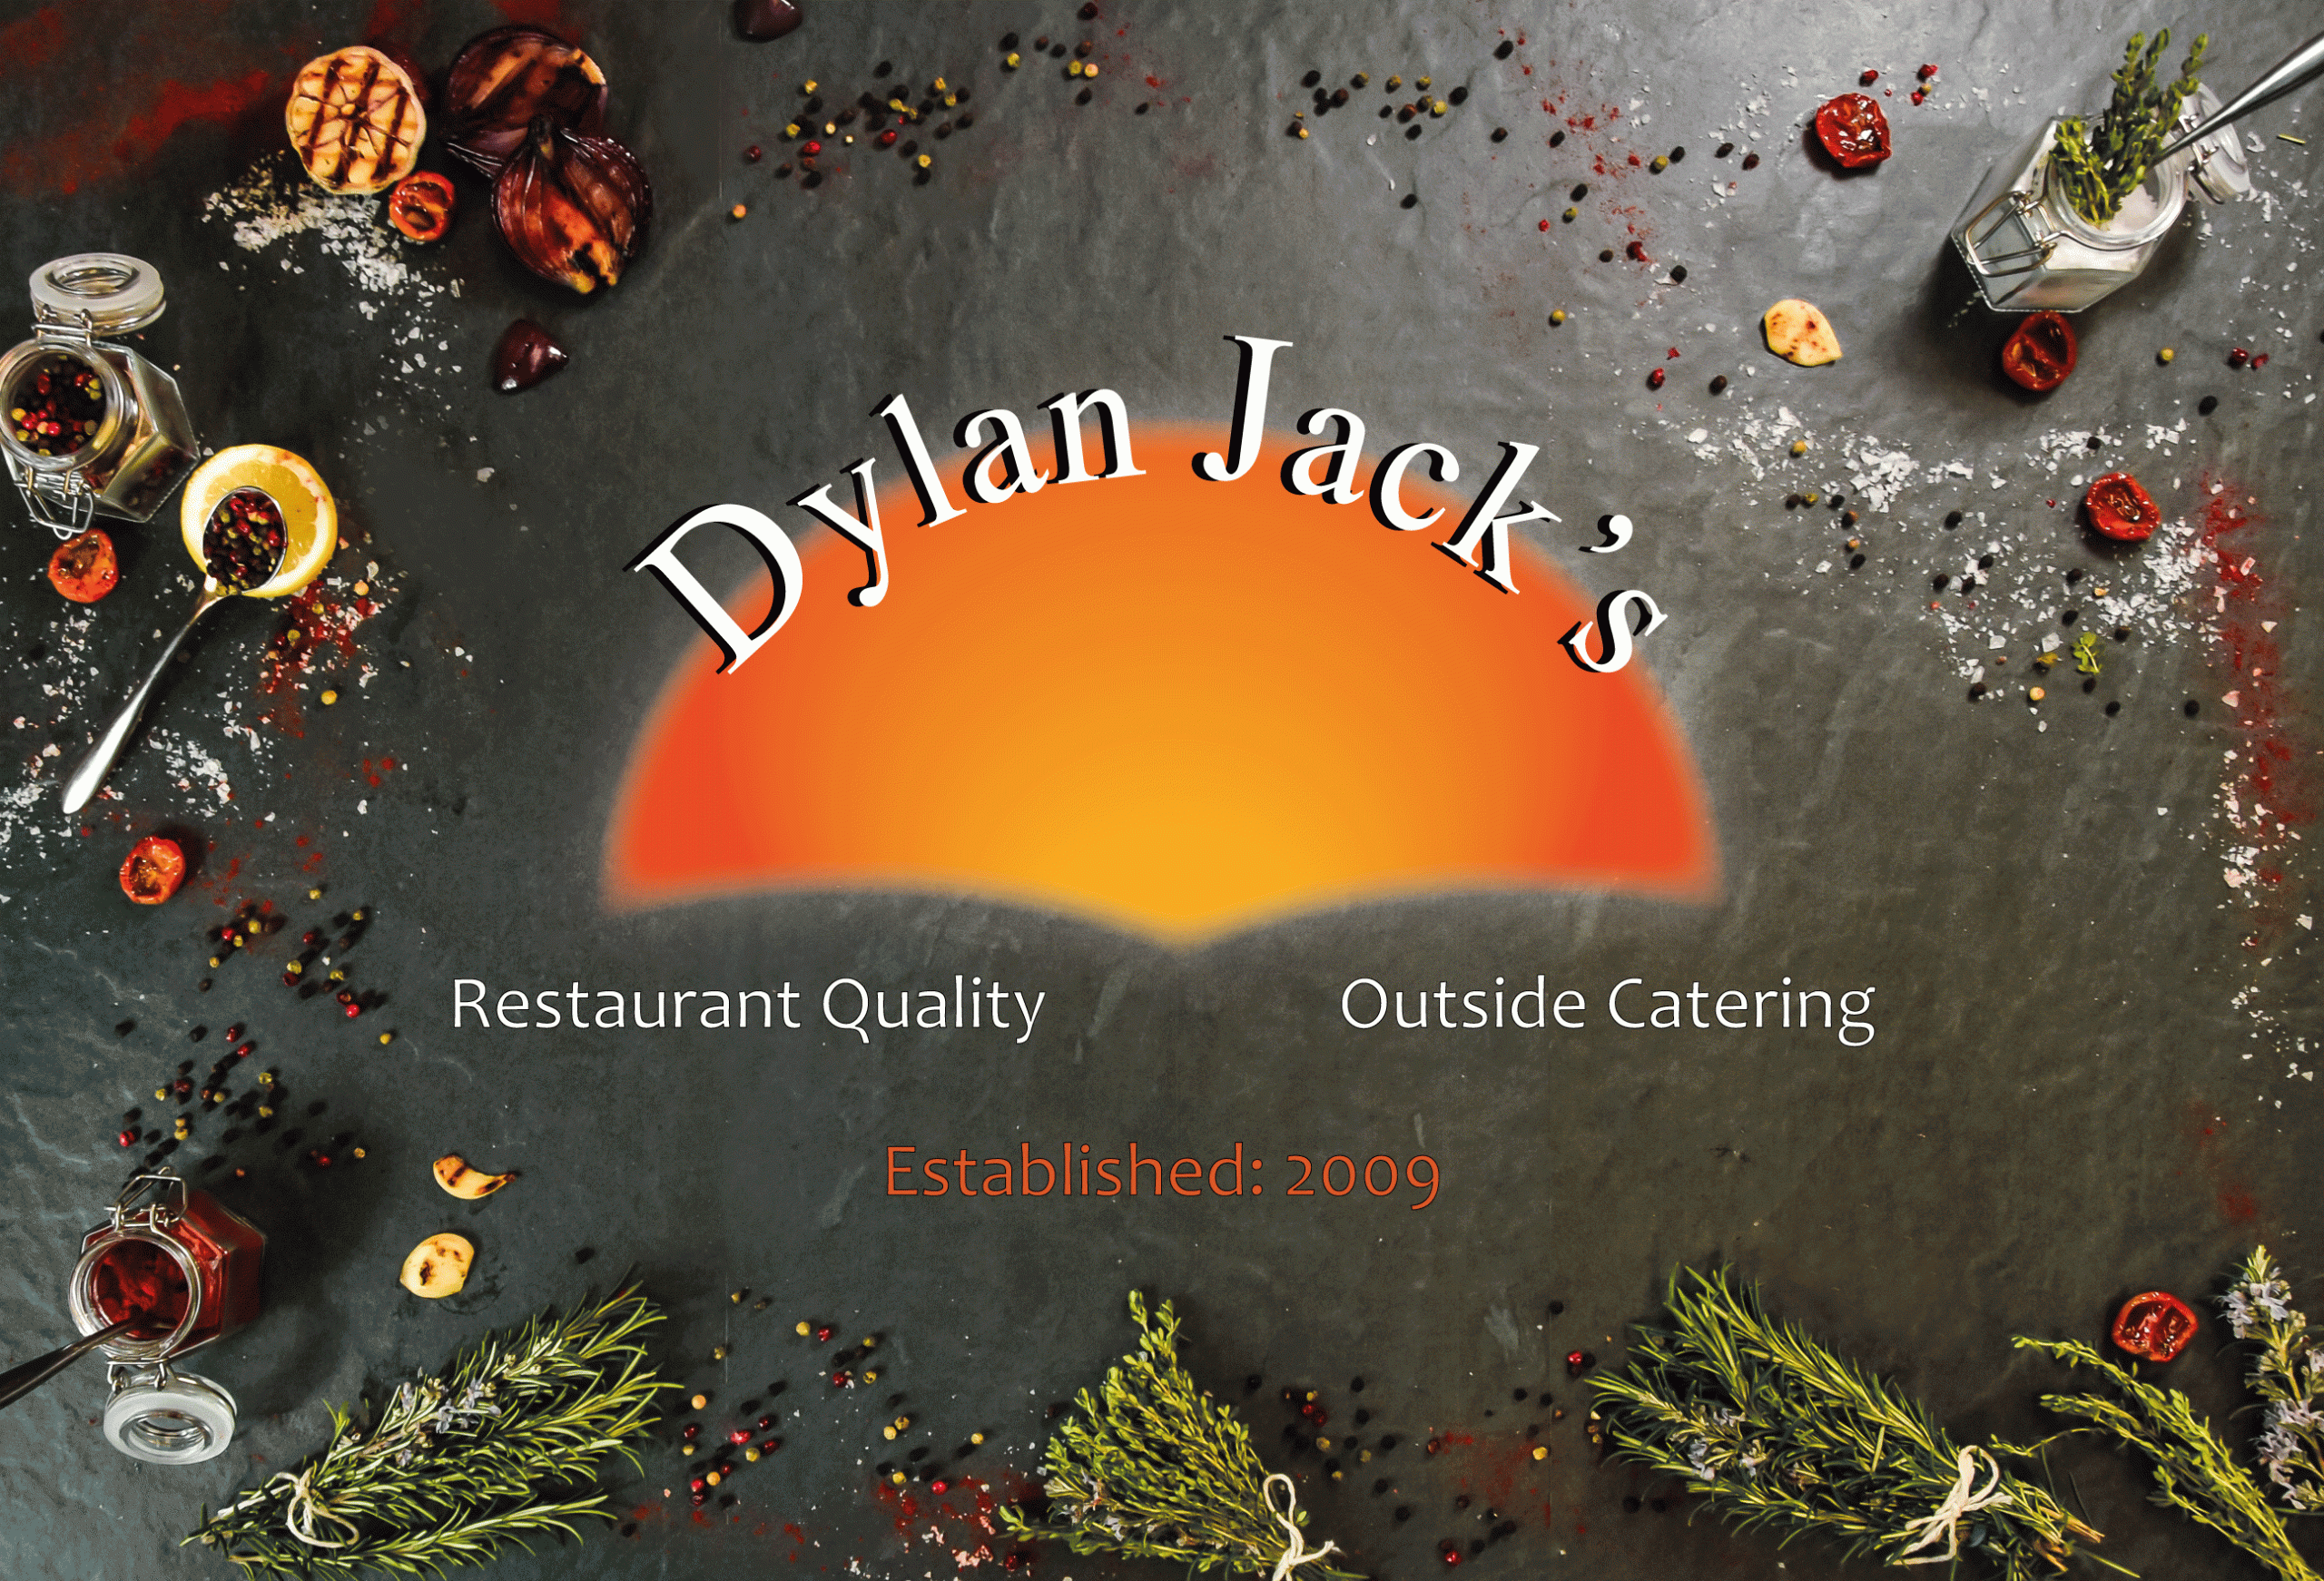 Dylan Jack's Catering